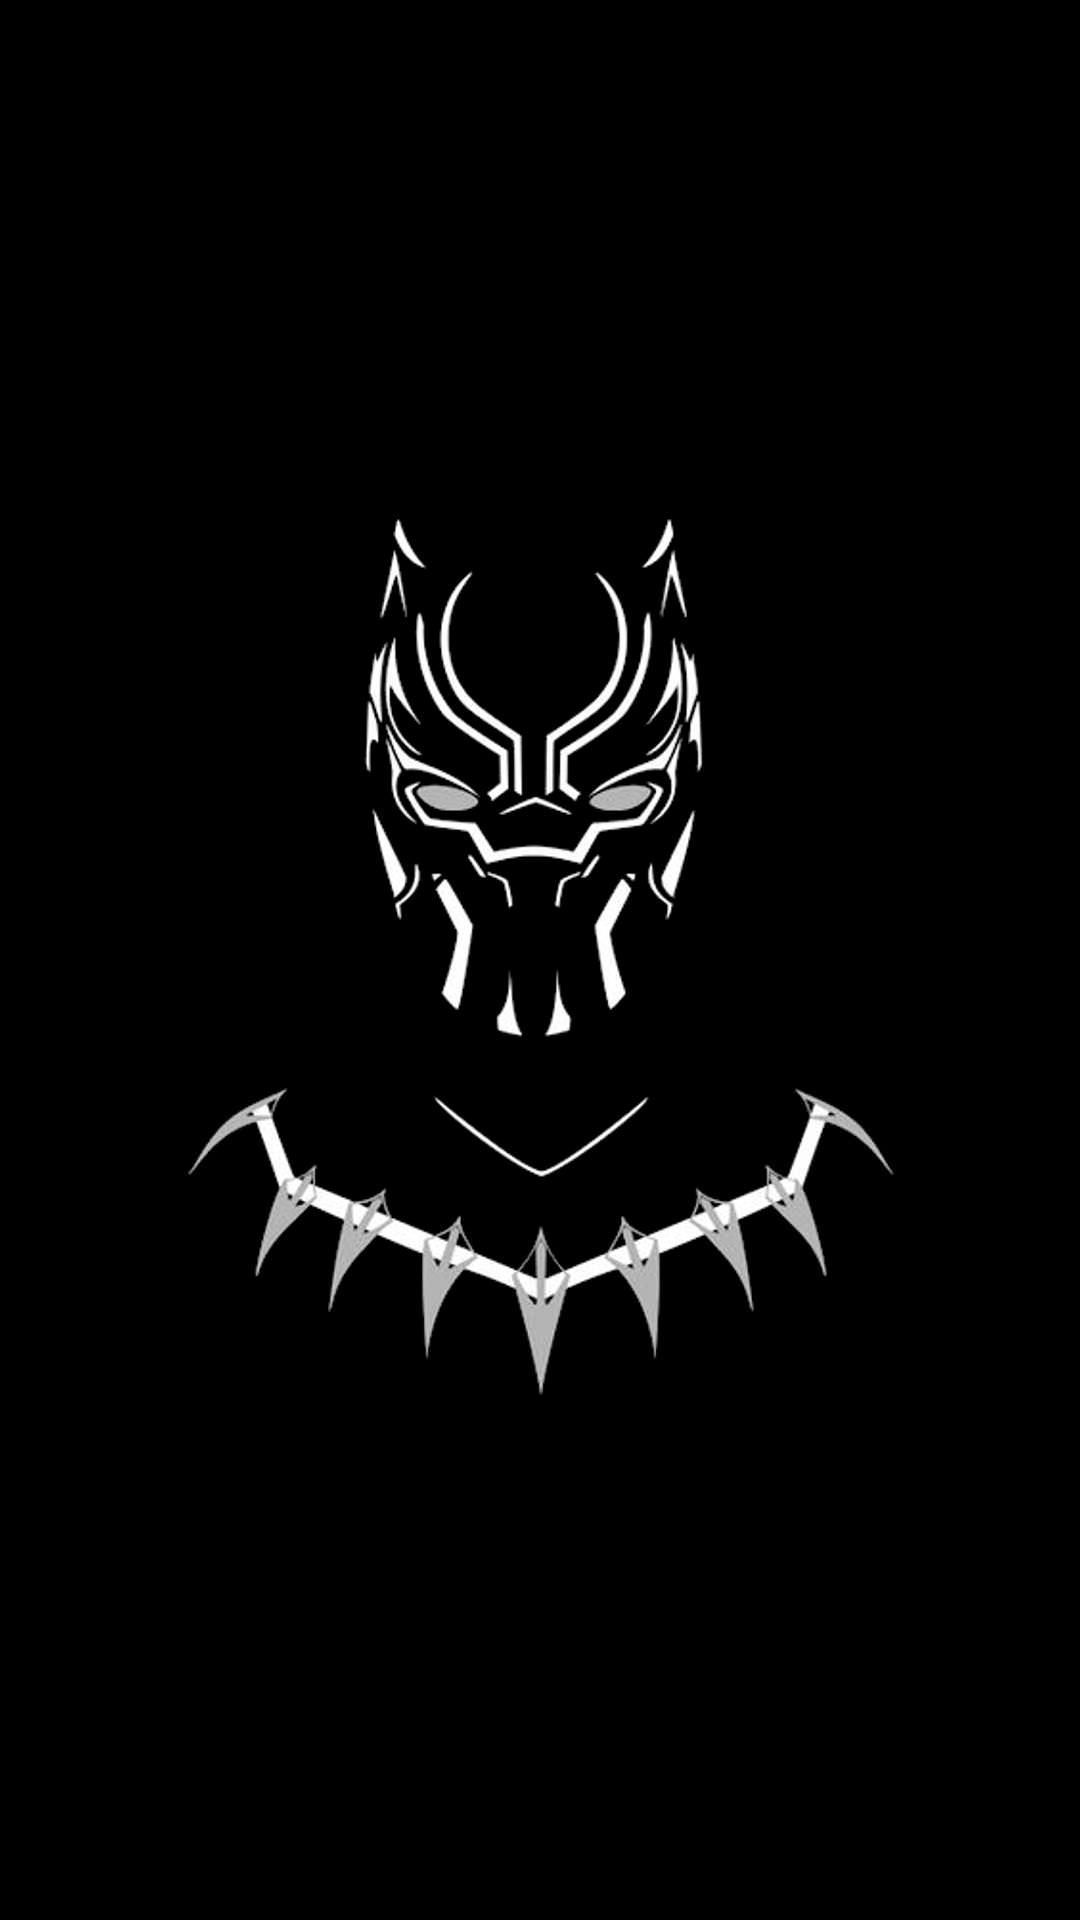 True Black Panther [1080x1920] (i.imgur.com) submitted